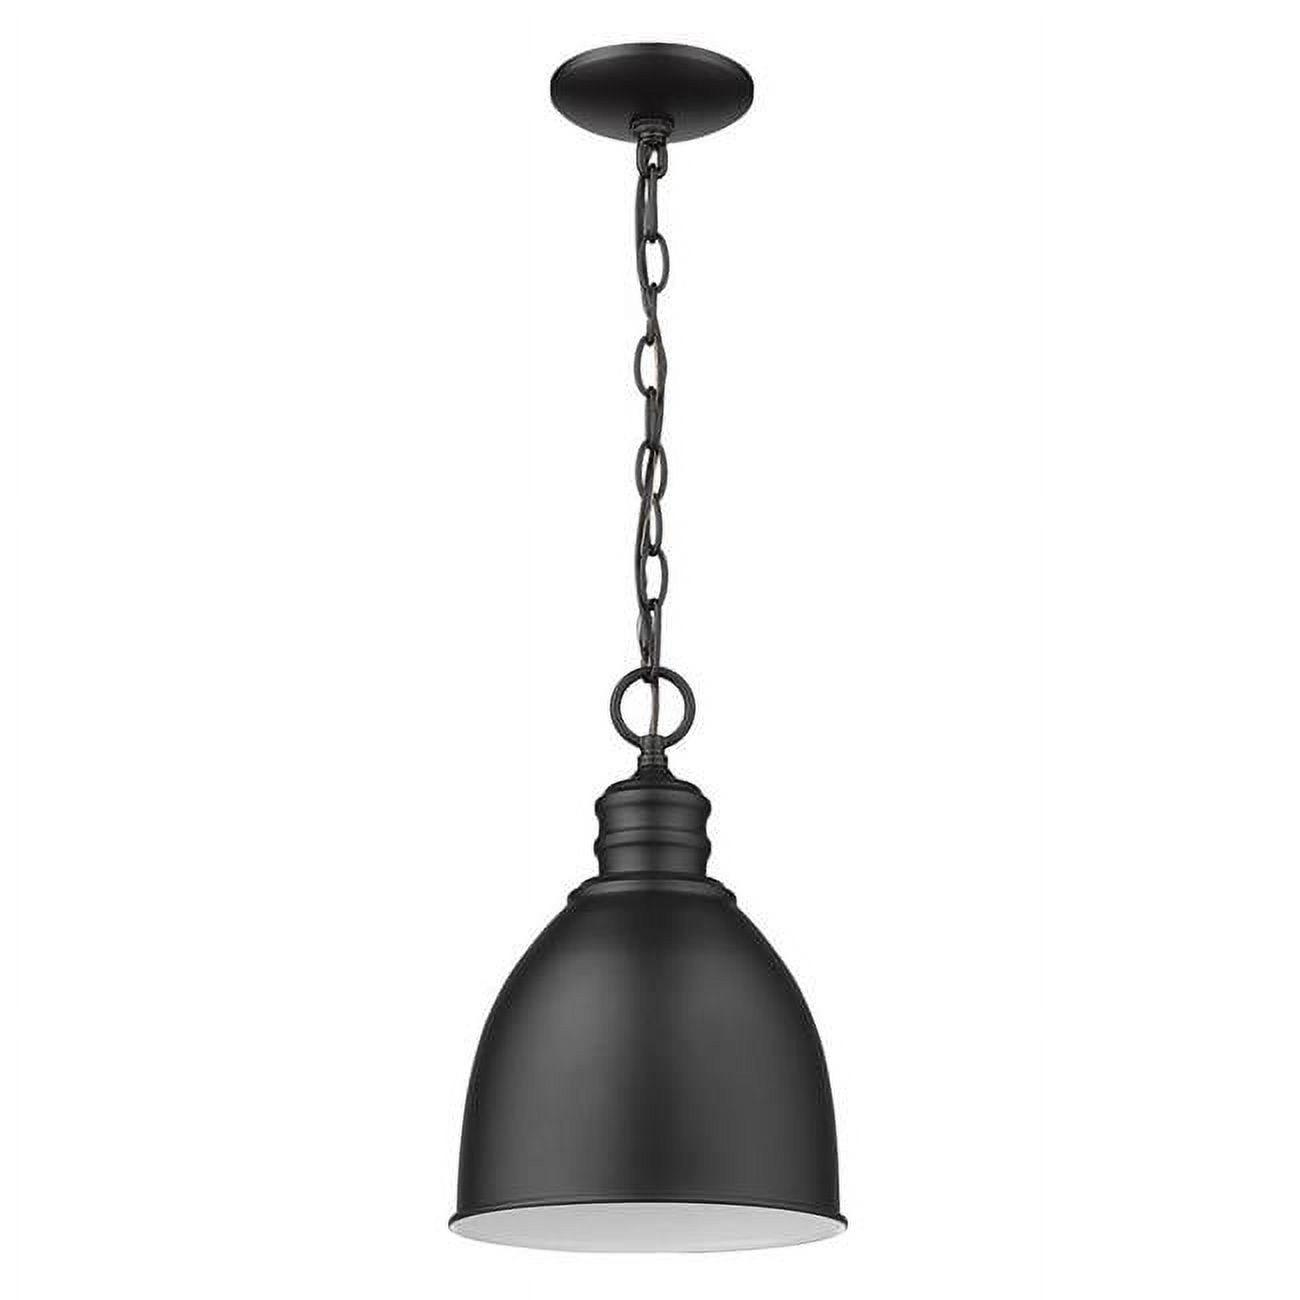 Acclaim Lighting IN11171BK 13.25 in. Colby 1-Light Matte Black Pendant with Gloss White Interior Shade - image 1 of 3